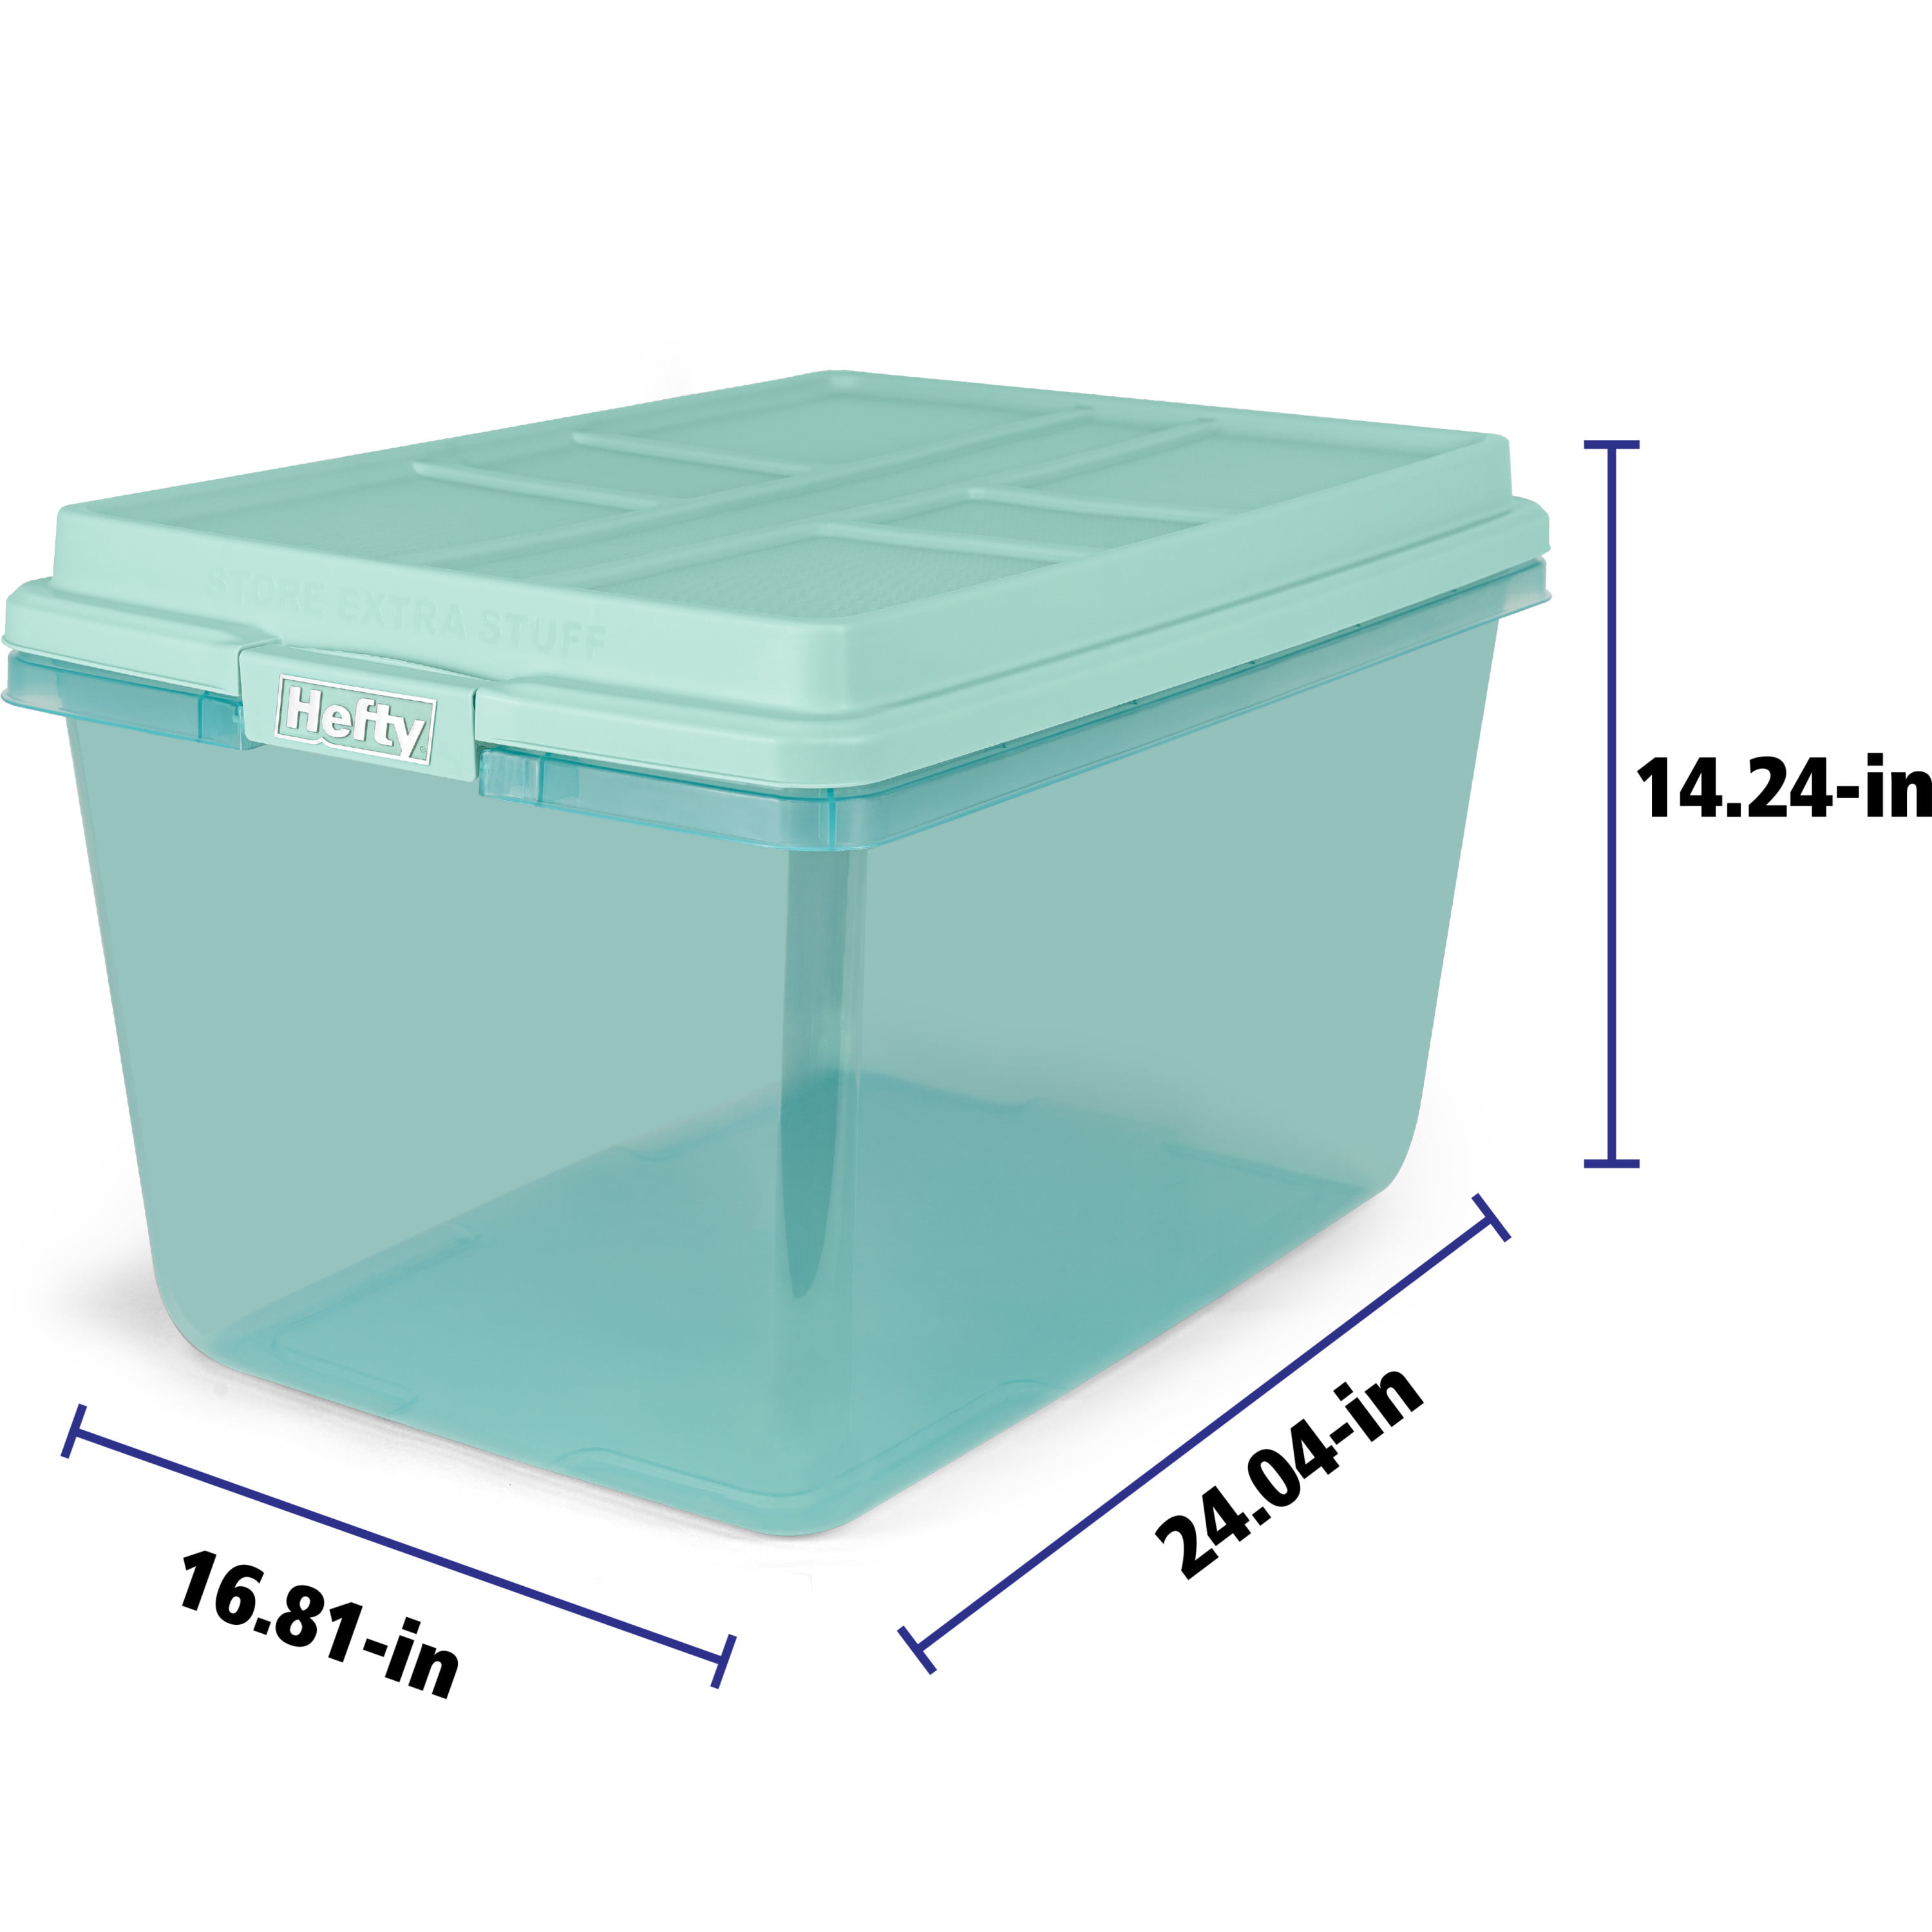 Hefty 72 qt Clear Plastic Holiday Latched Storage Bin, Red Lid 